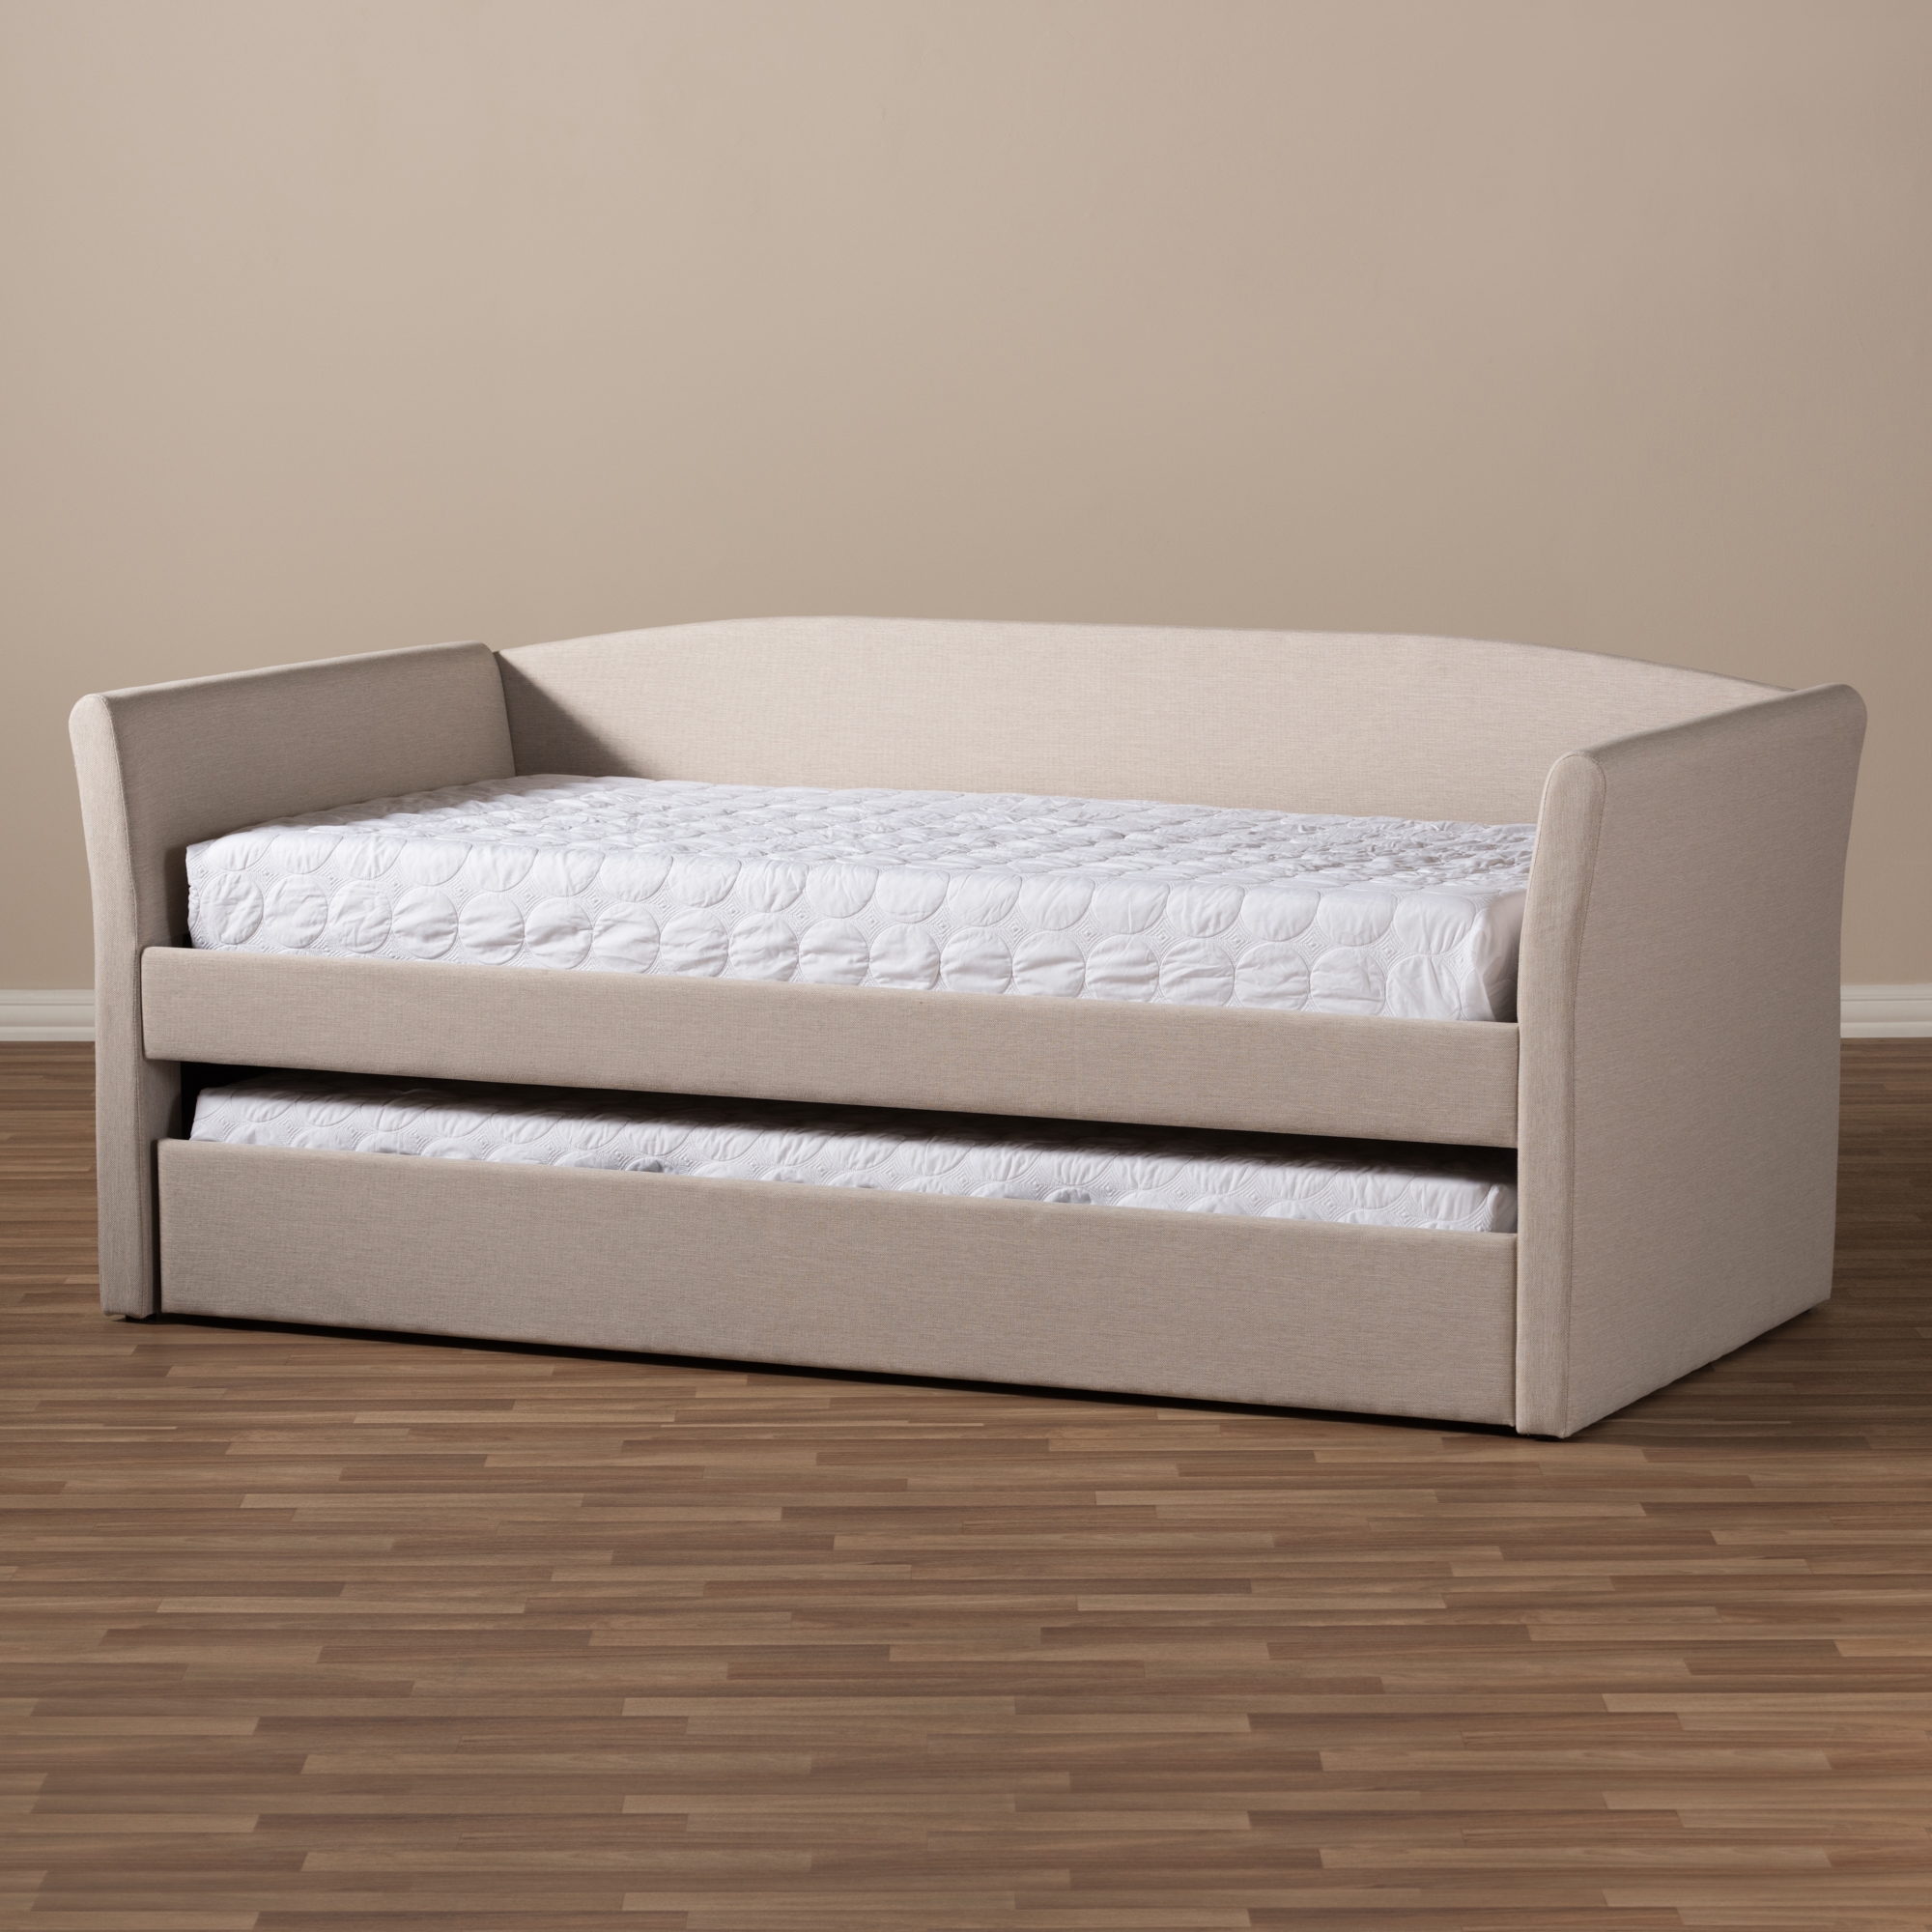 Pull out sofa bed - noredeveryday